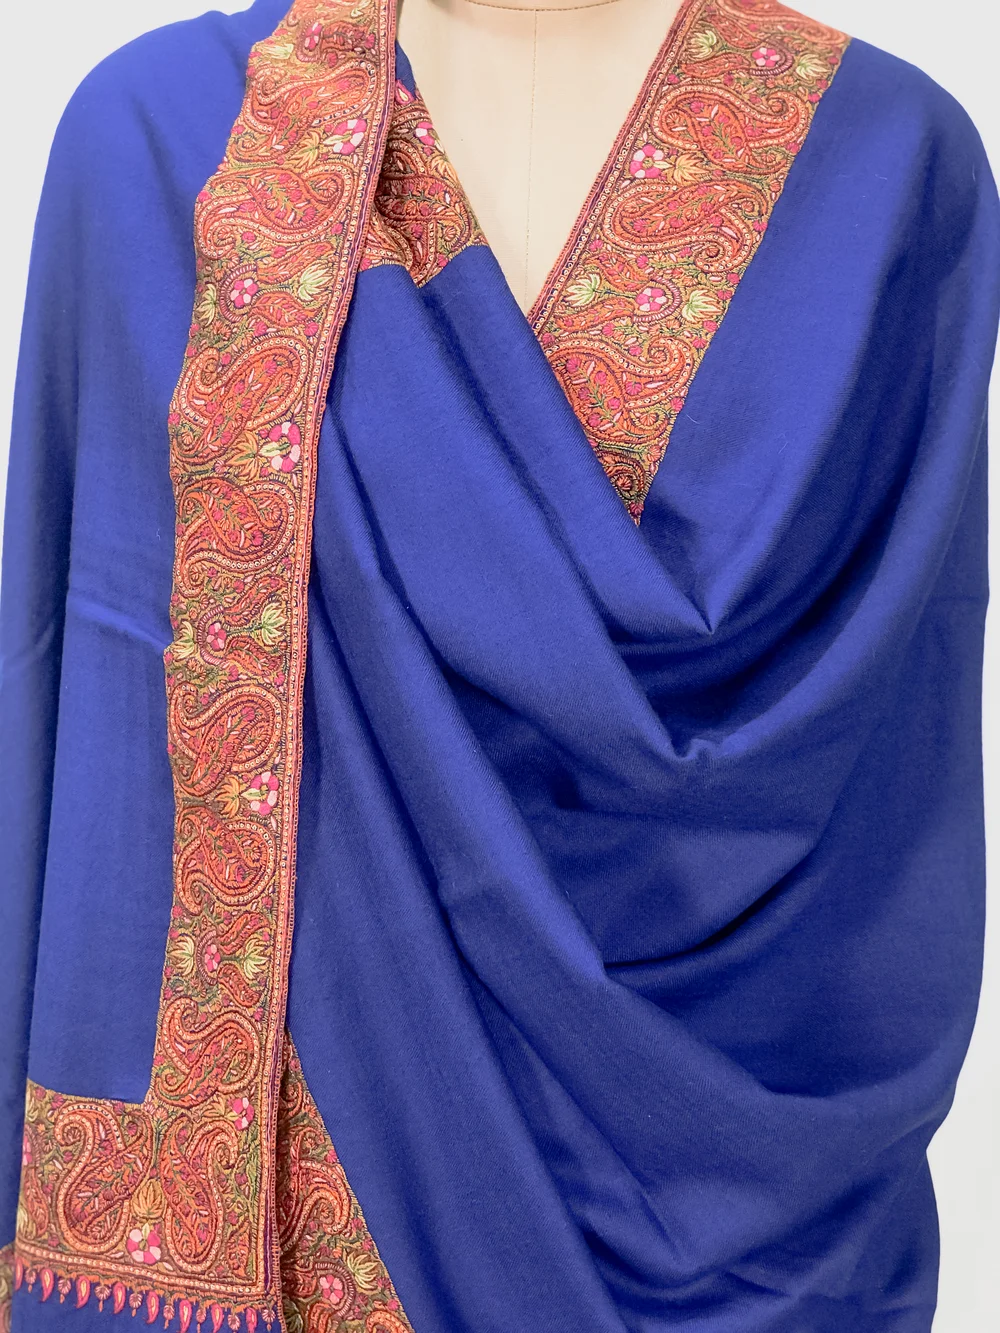 Royal Blue Pure Pashmina Shawl With Intricate Sozni hand Embroidery front